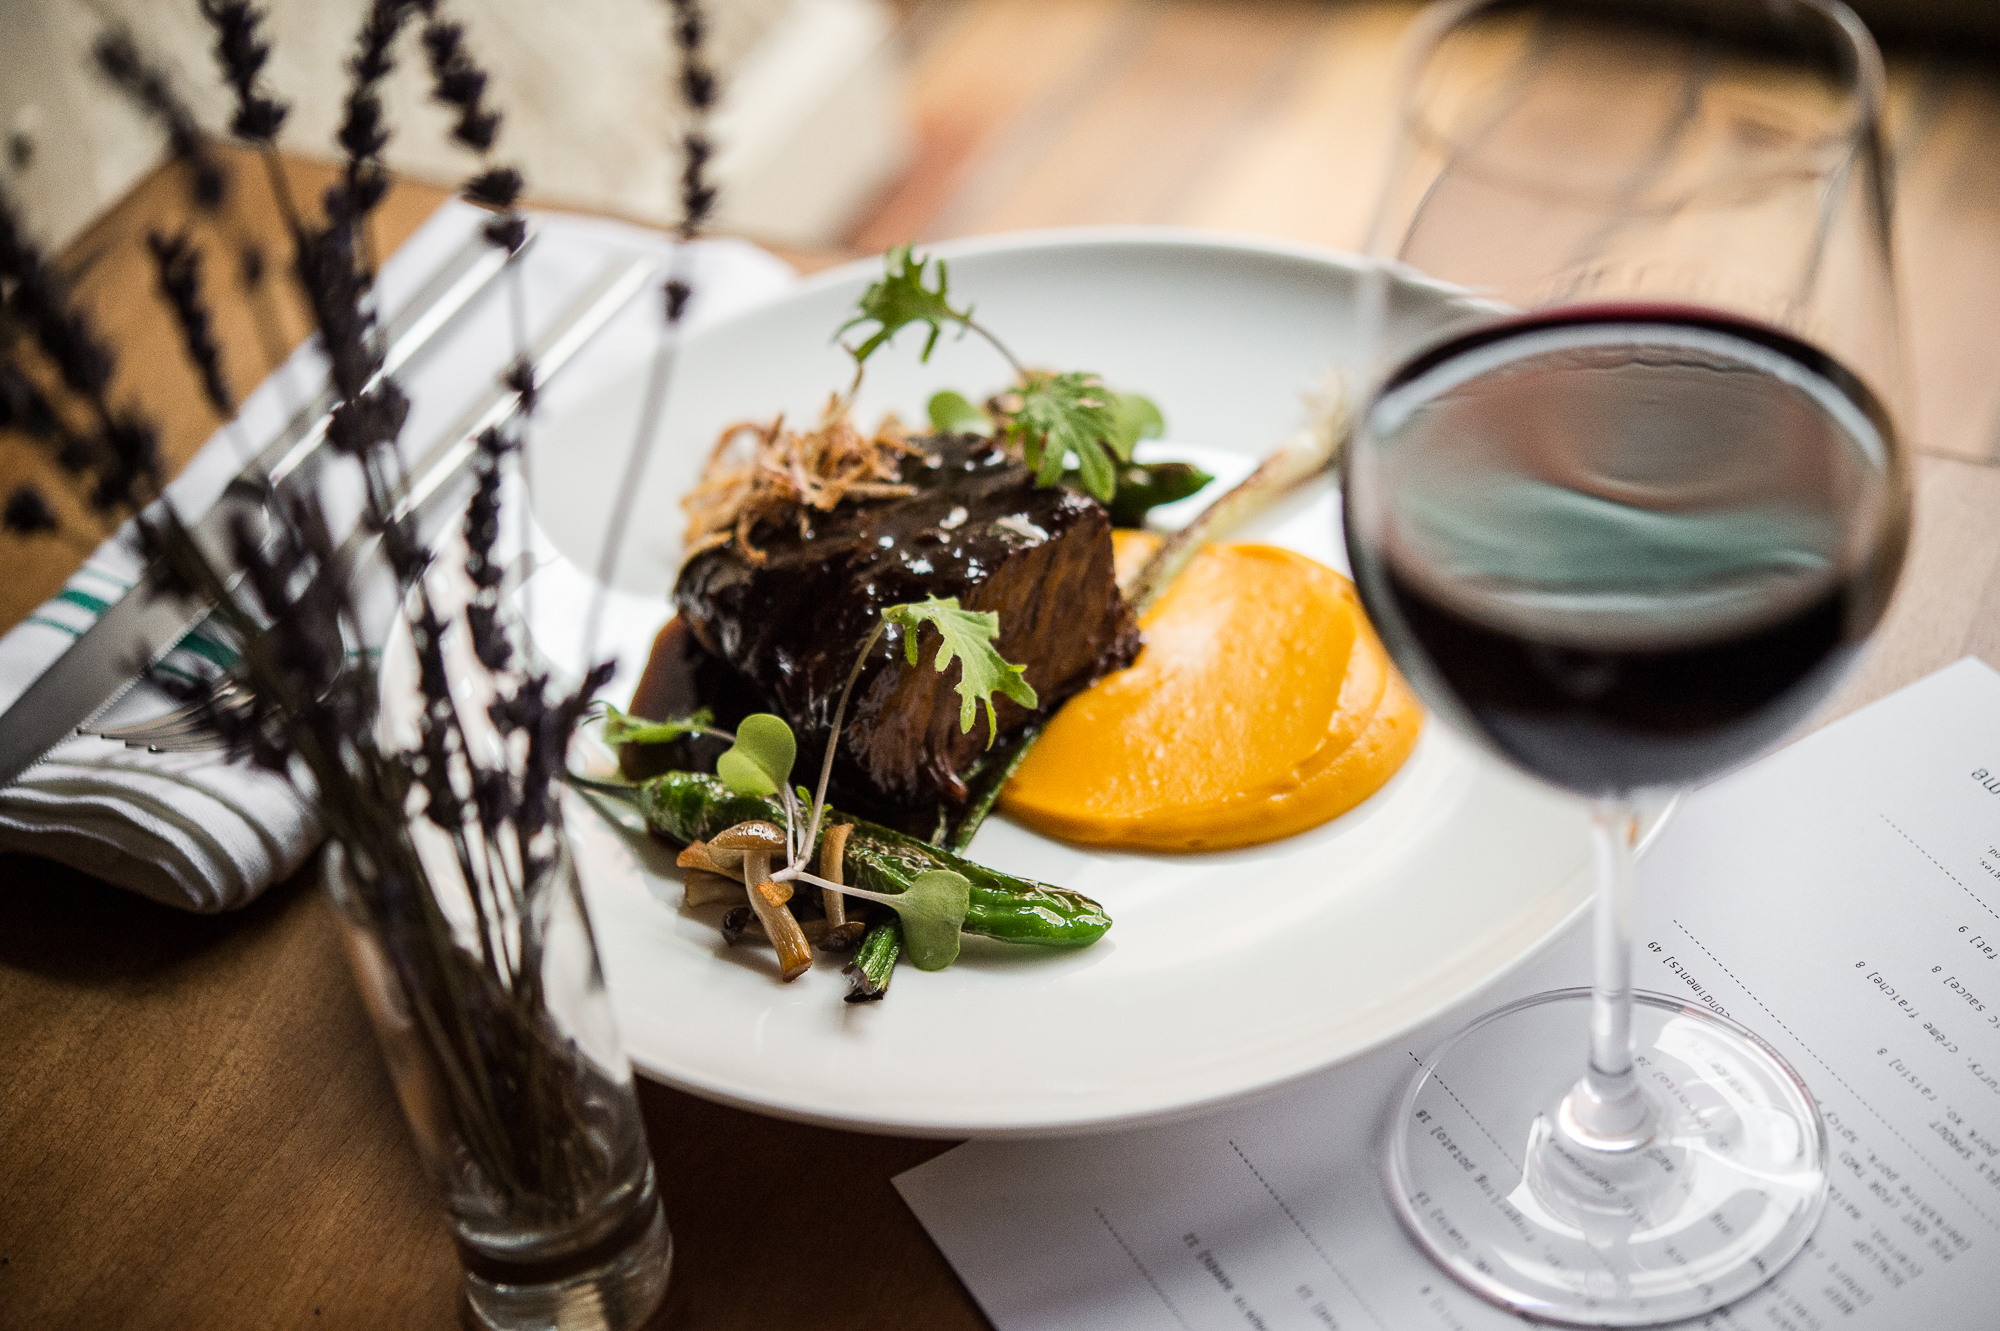 A glass of red wine and flowers in front of a white plate with a saucy meat dish at Tuome.